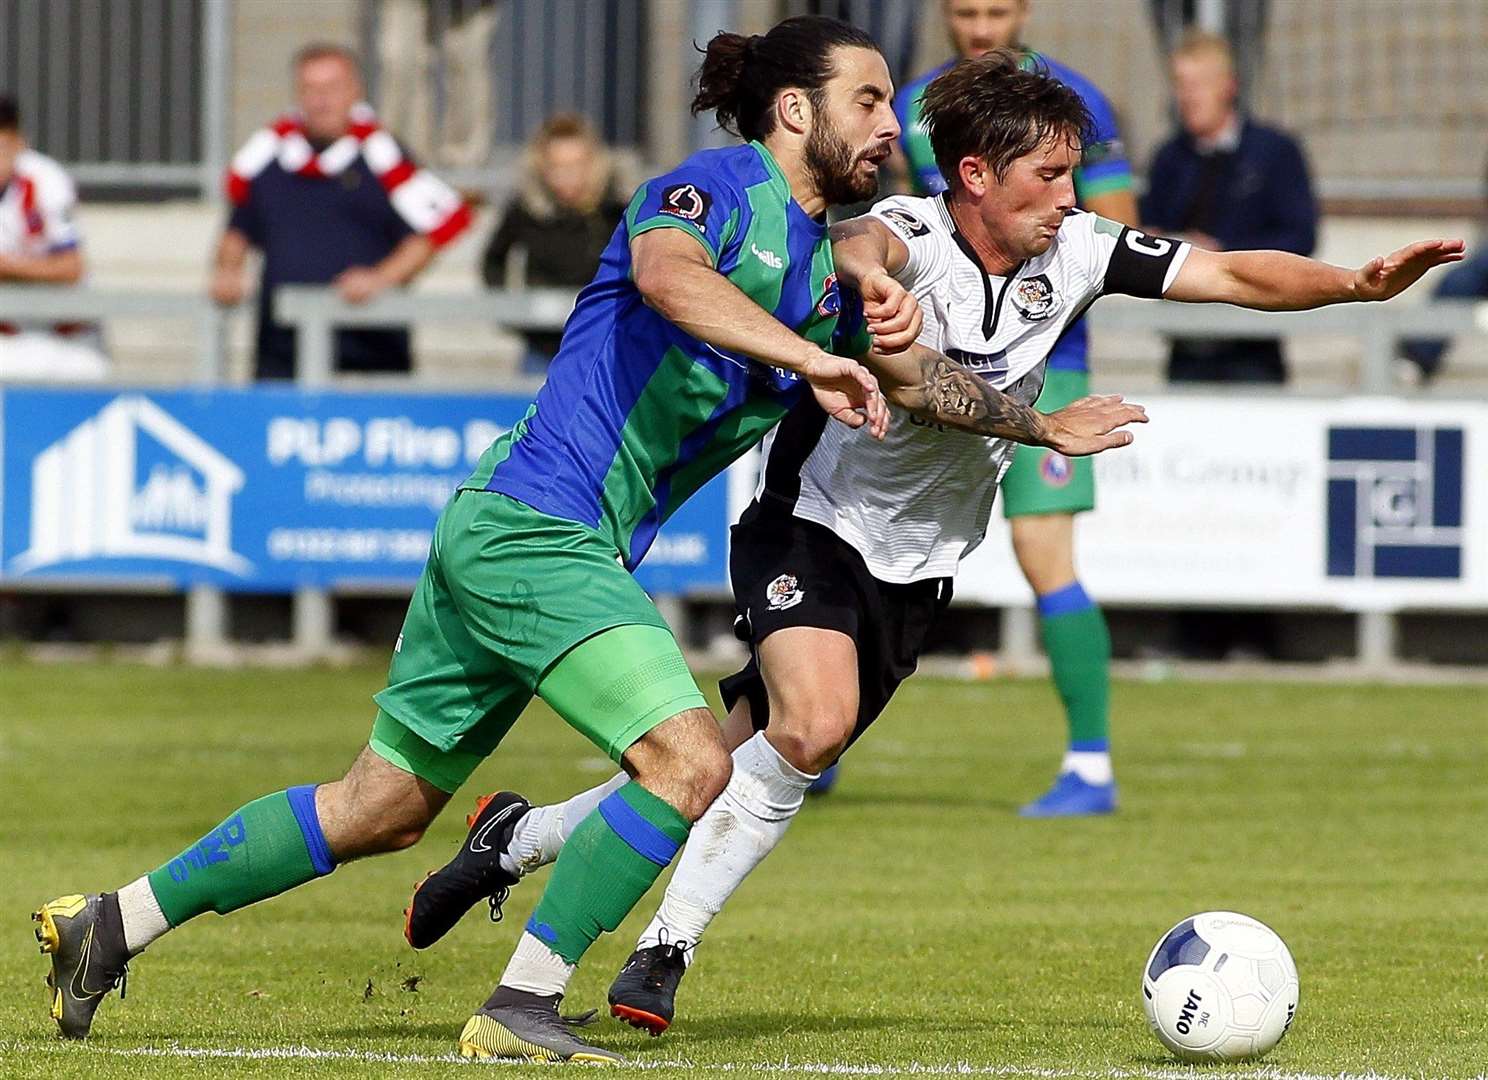 Dartford's Lee Noble holds off Dorking Wanderers' Daniel Gallagher. Picture: Sean Aidan